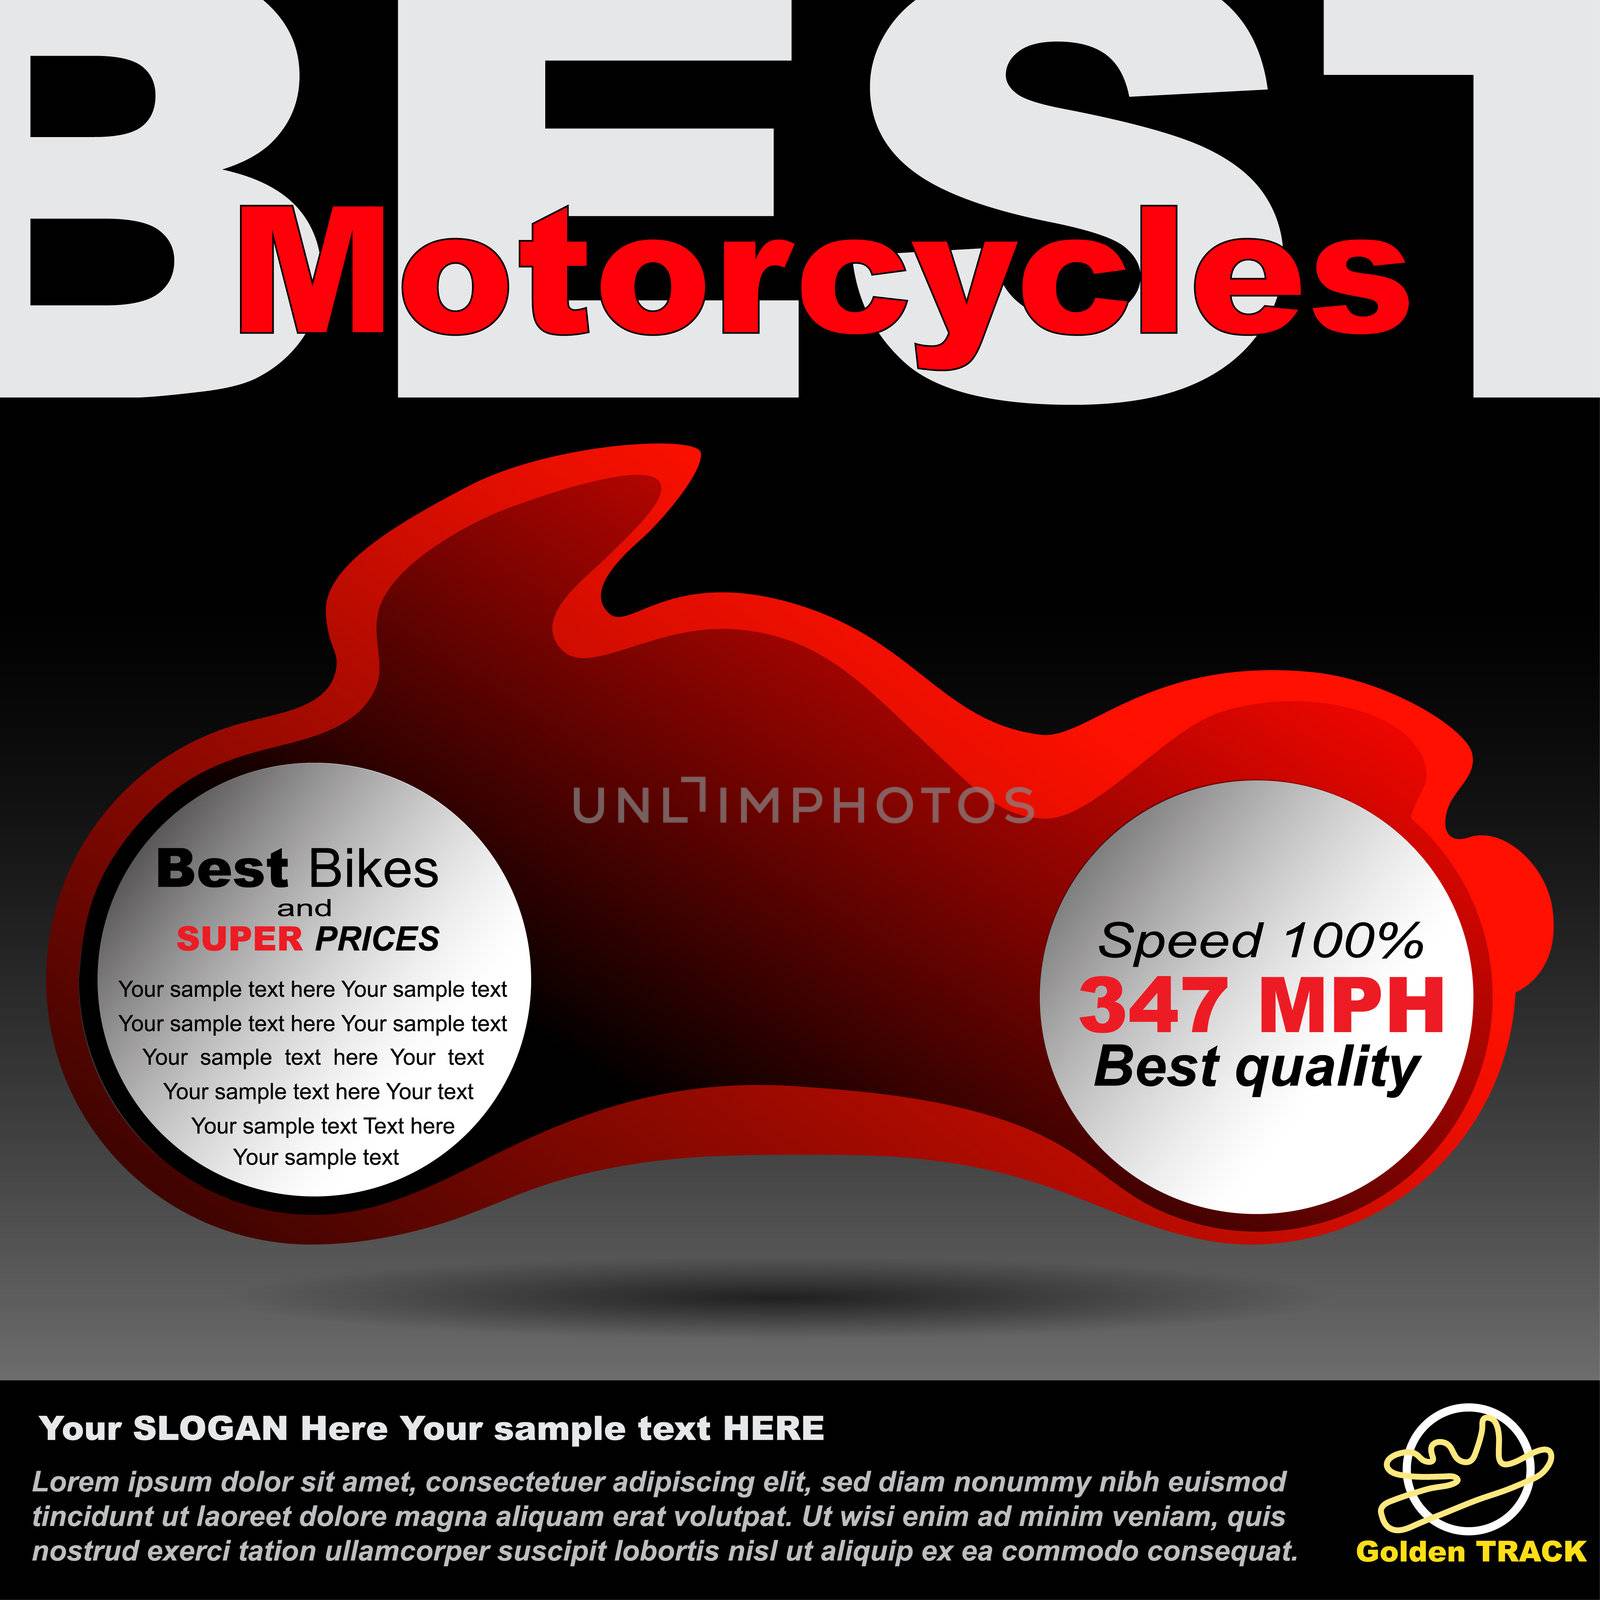 Poster or billboard about motorcycles, race so moto shop. Premium design for announcement